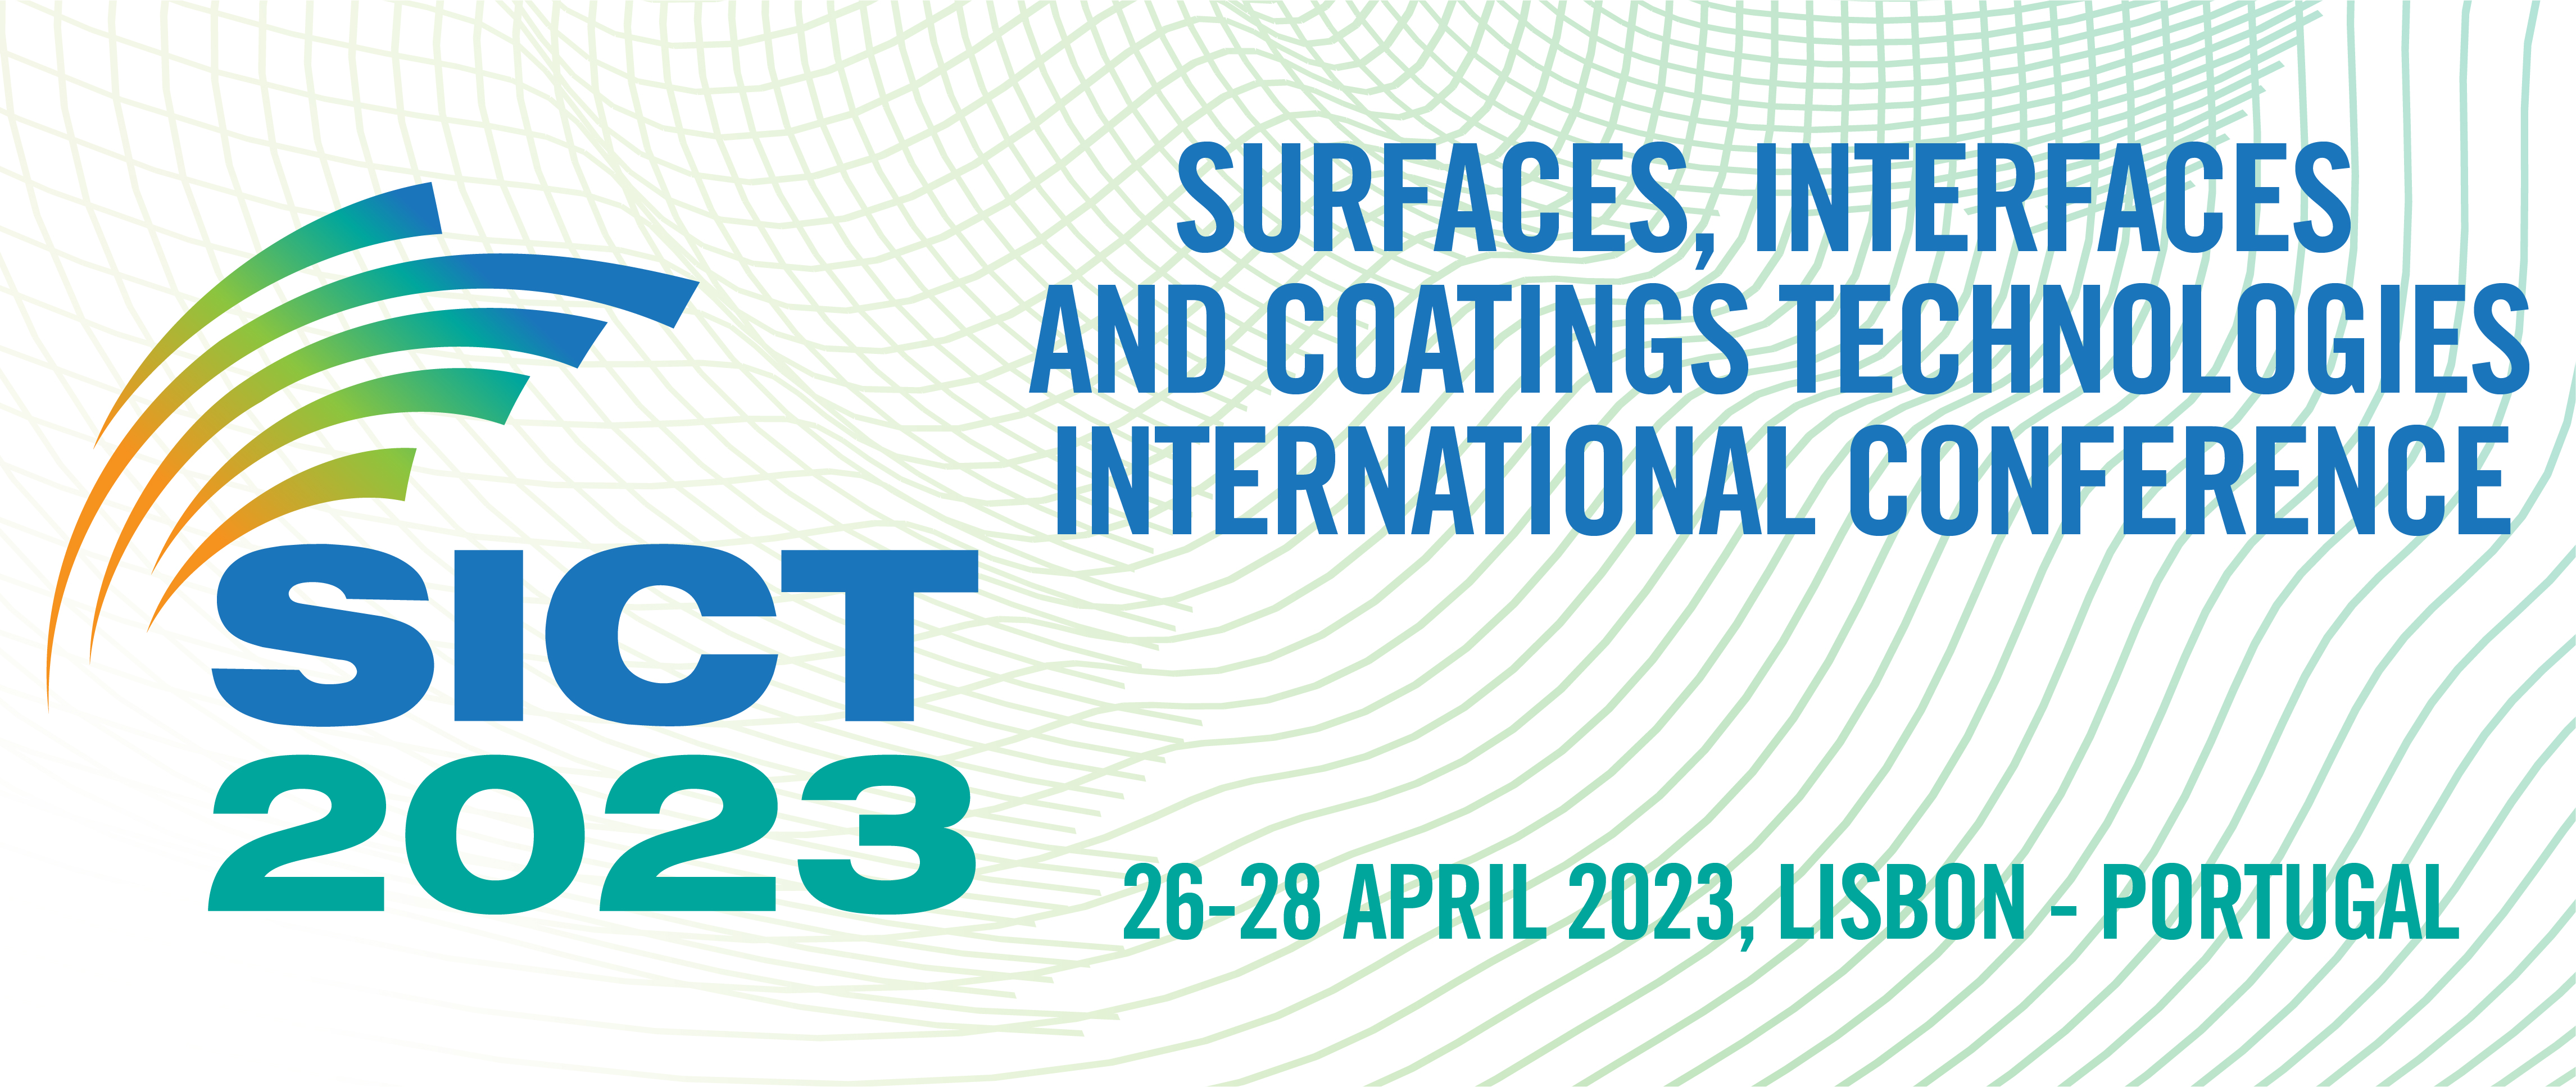 Surfaces, Interfaces and Coatings Technologies International conference - SICT 2023